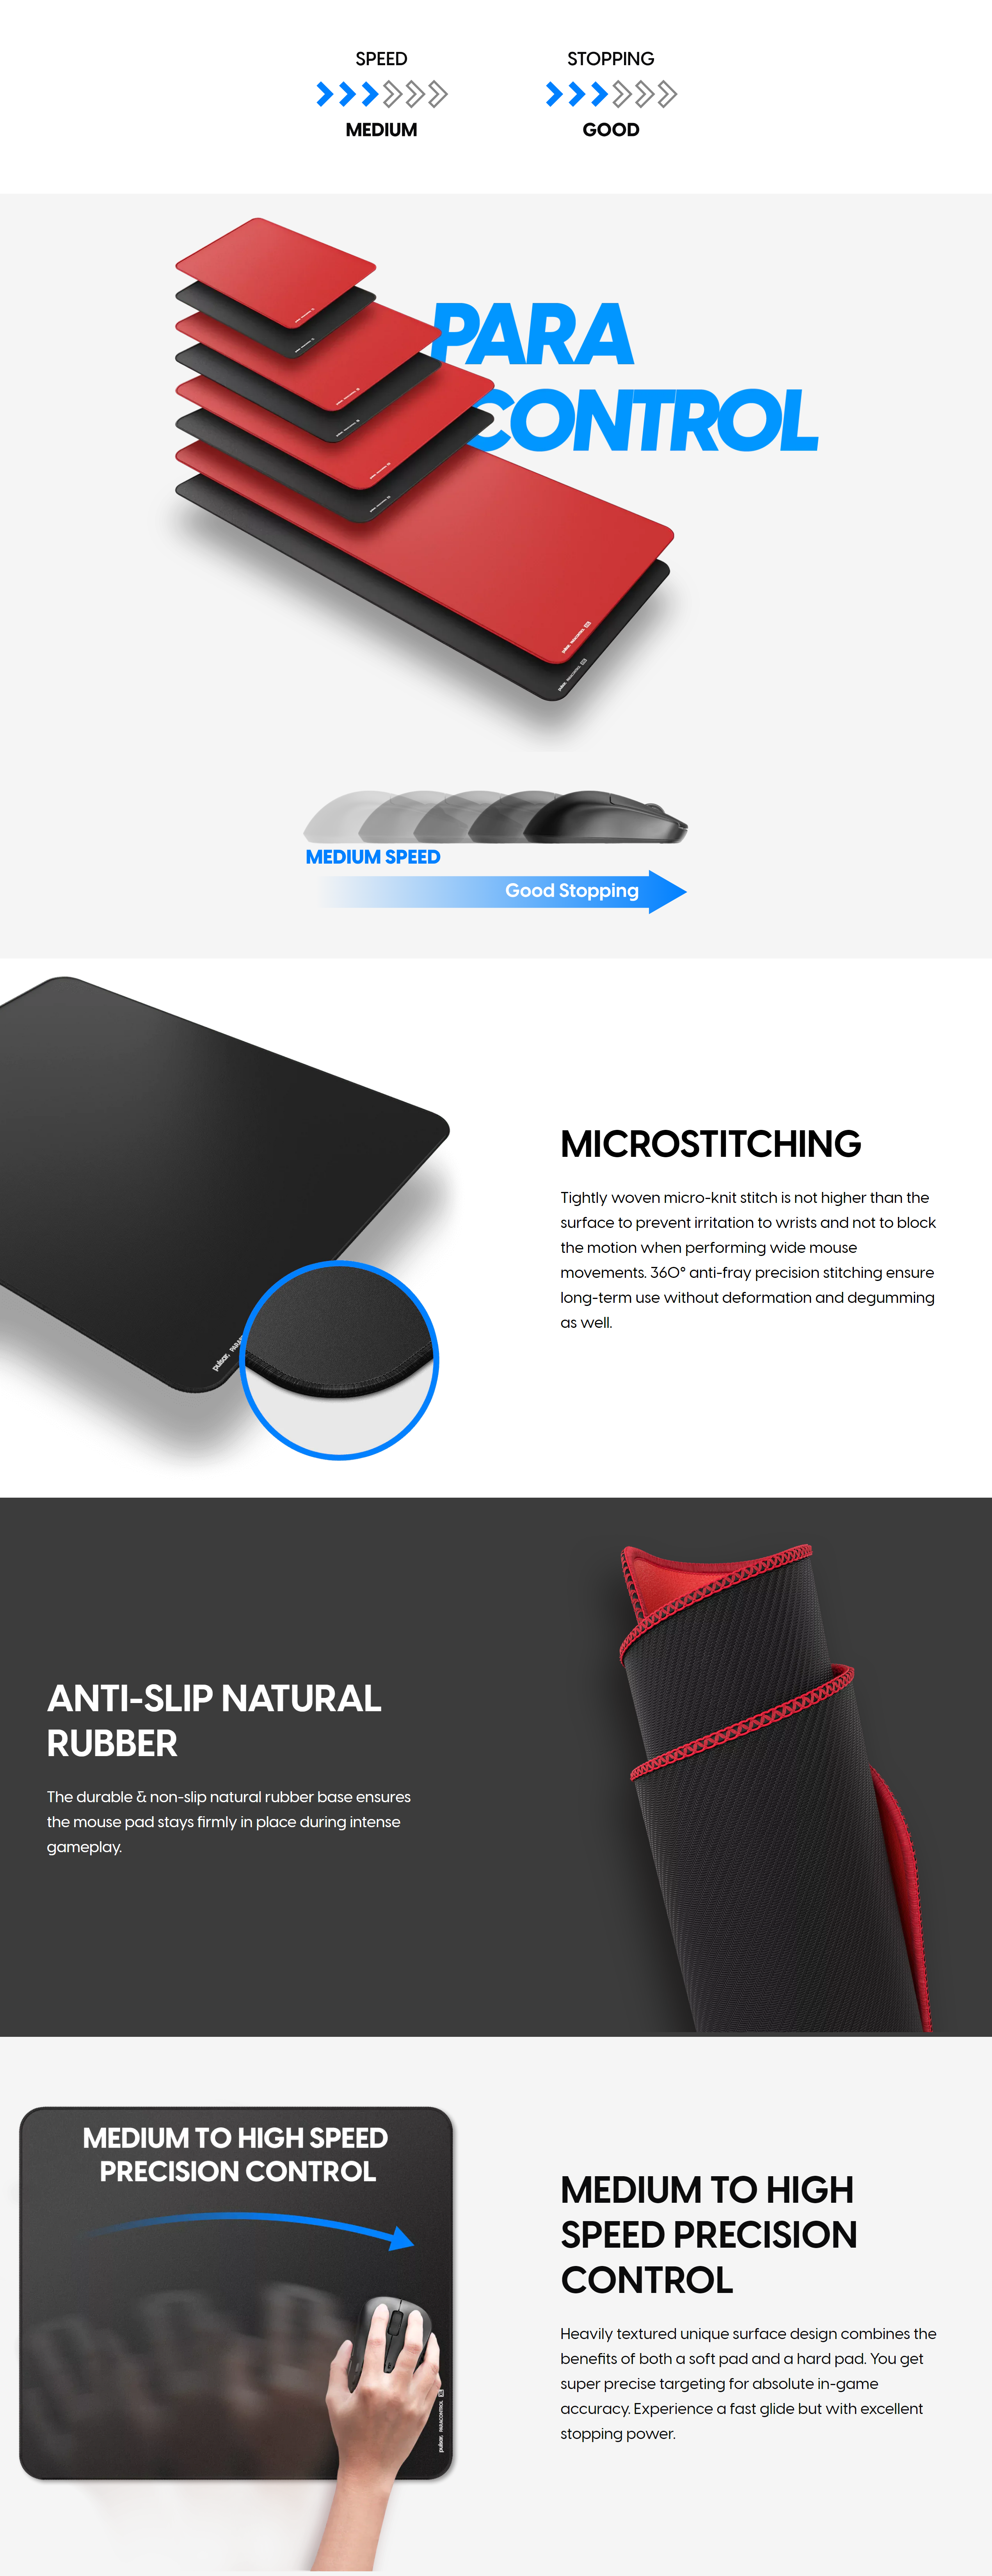 A large marketing image providing additional information about the product Pulsar Paracontrol V2 Mousepad Two XL - Black - Additional alt info not provided